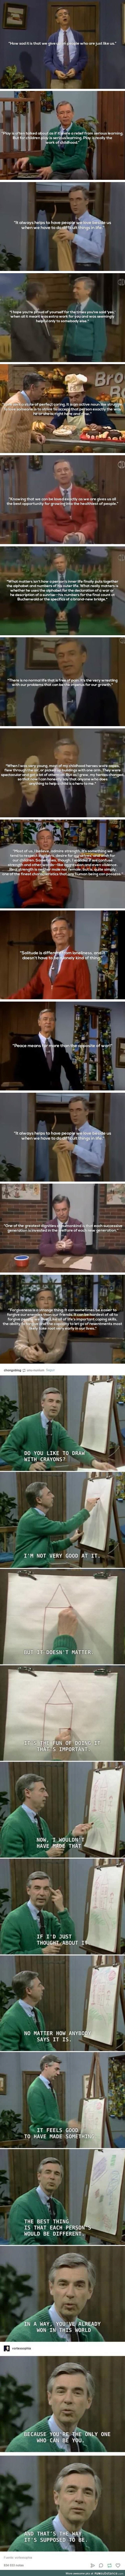 A wholesome Mr. Rogers comp